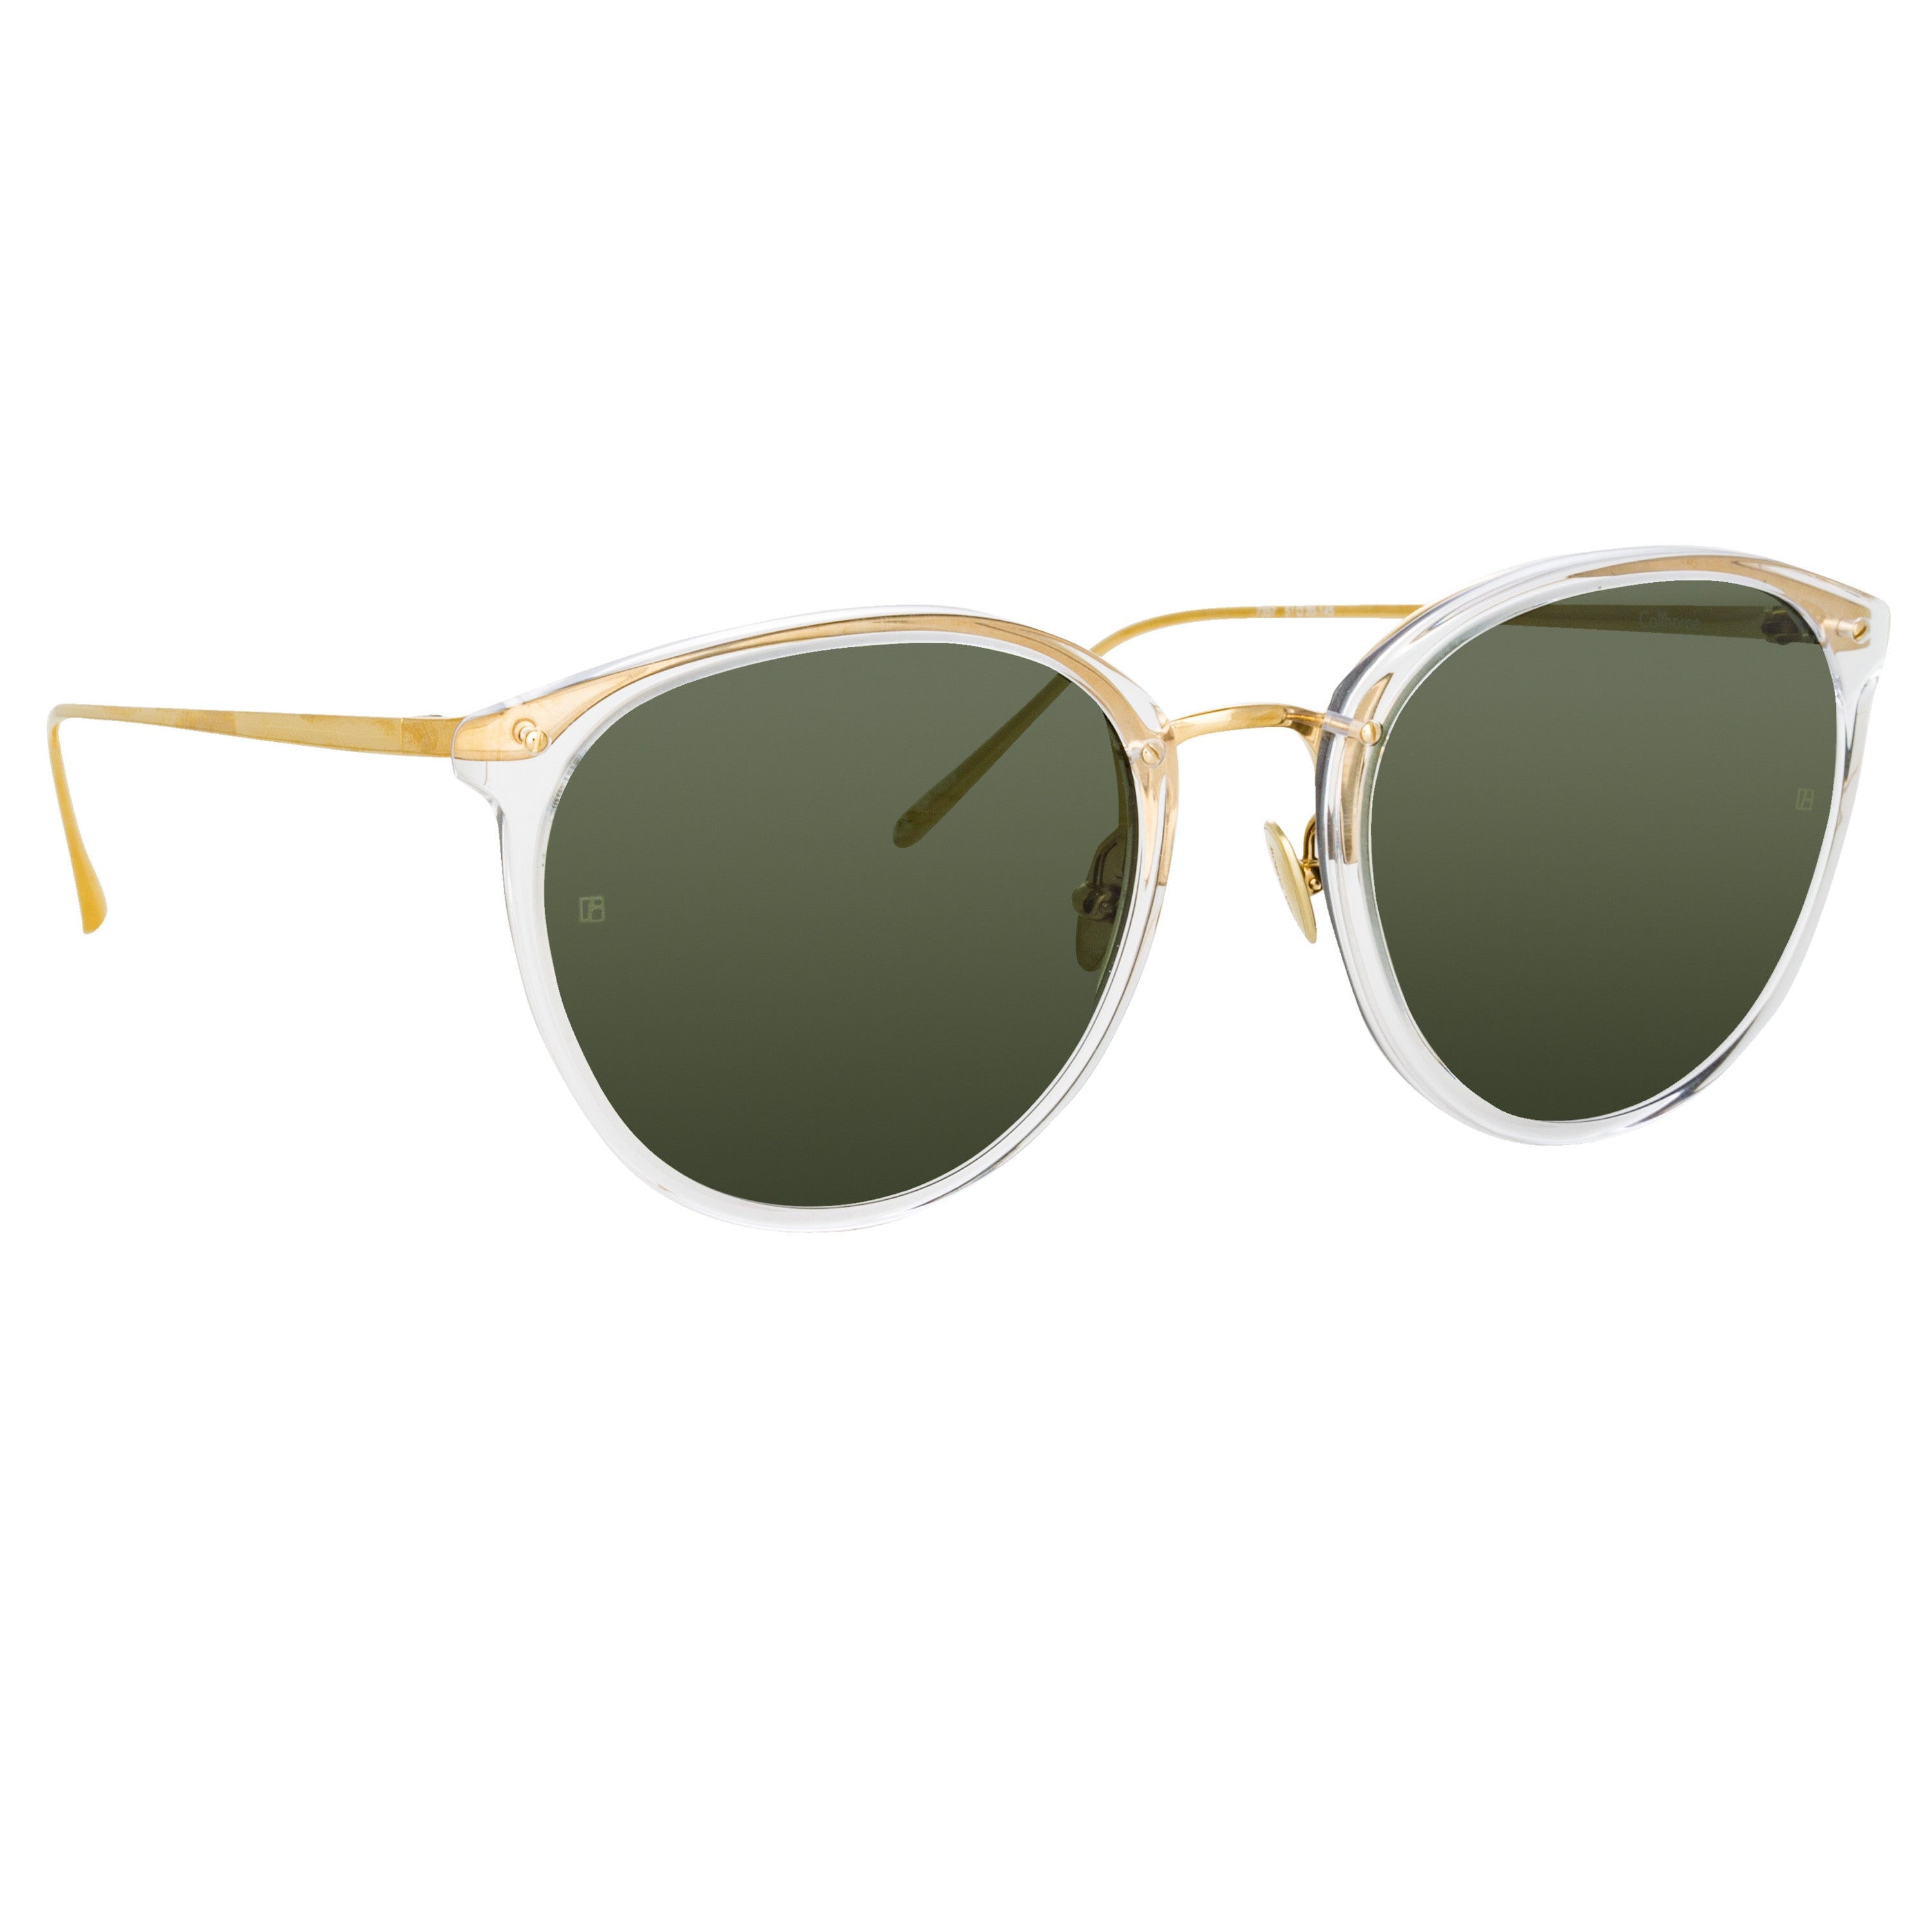 THE CALTHORPE |  OVAL SUNGLASSES IN CLEAR FRAME(C76) - 4